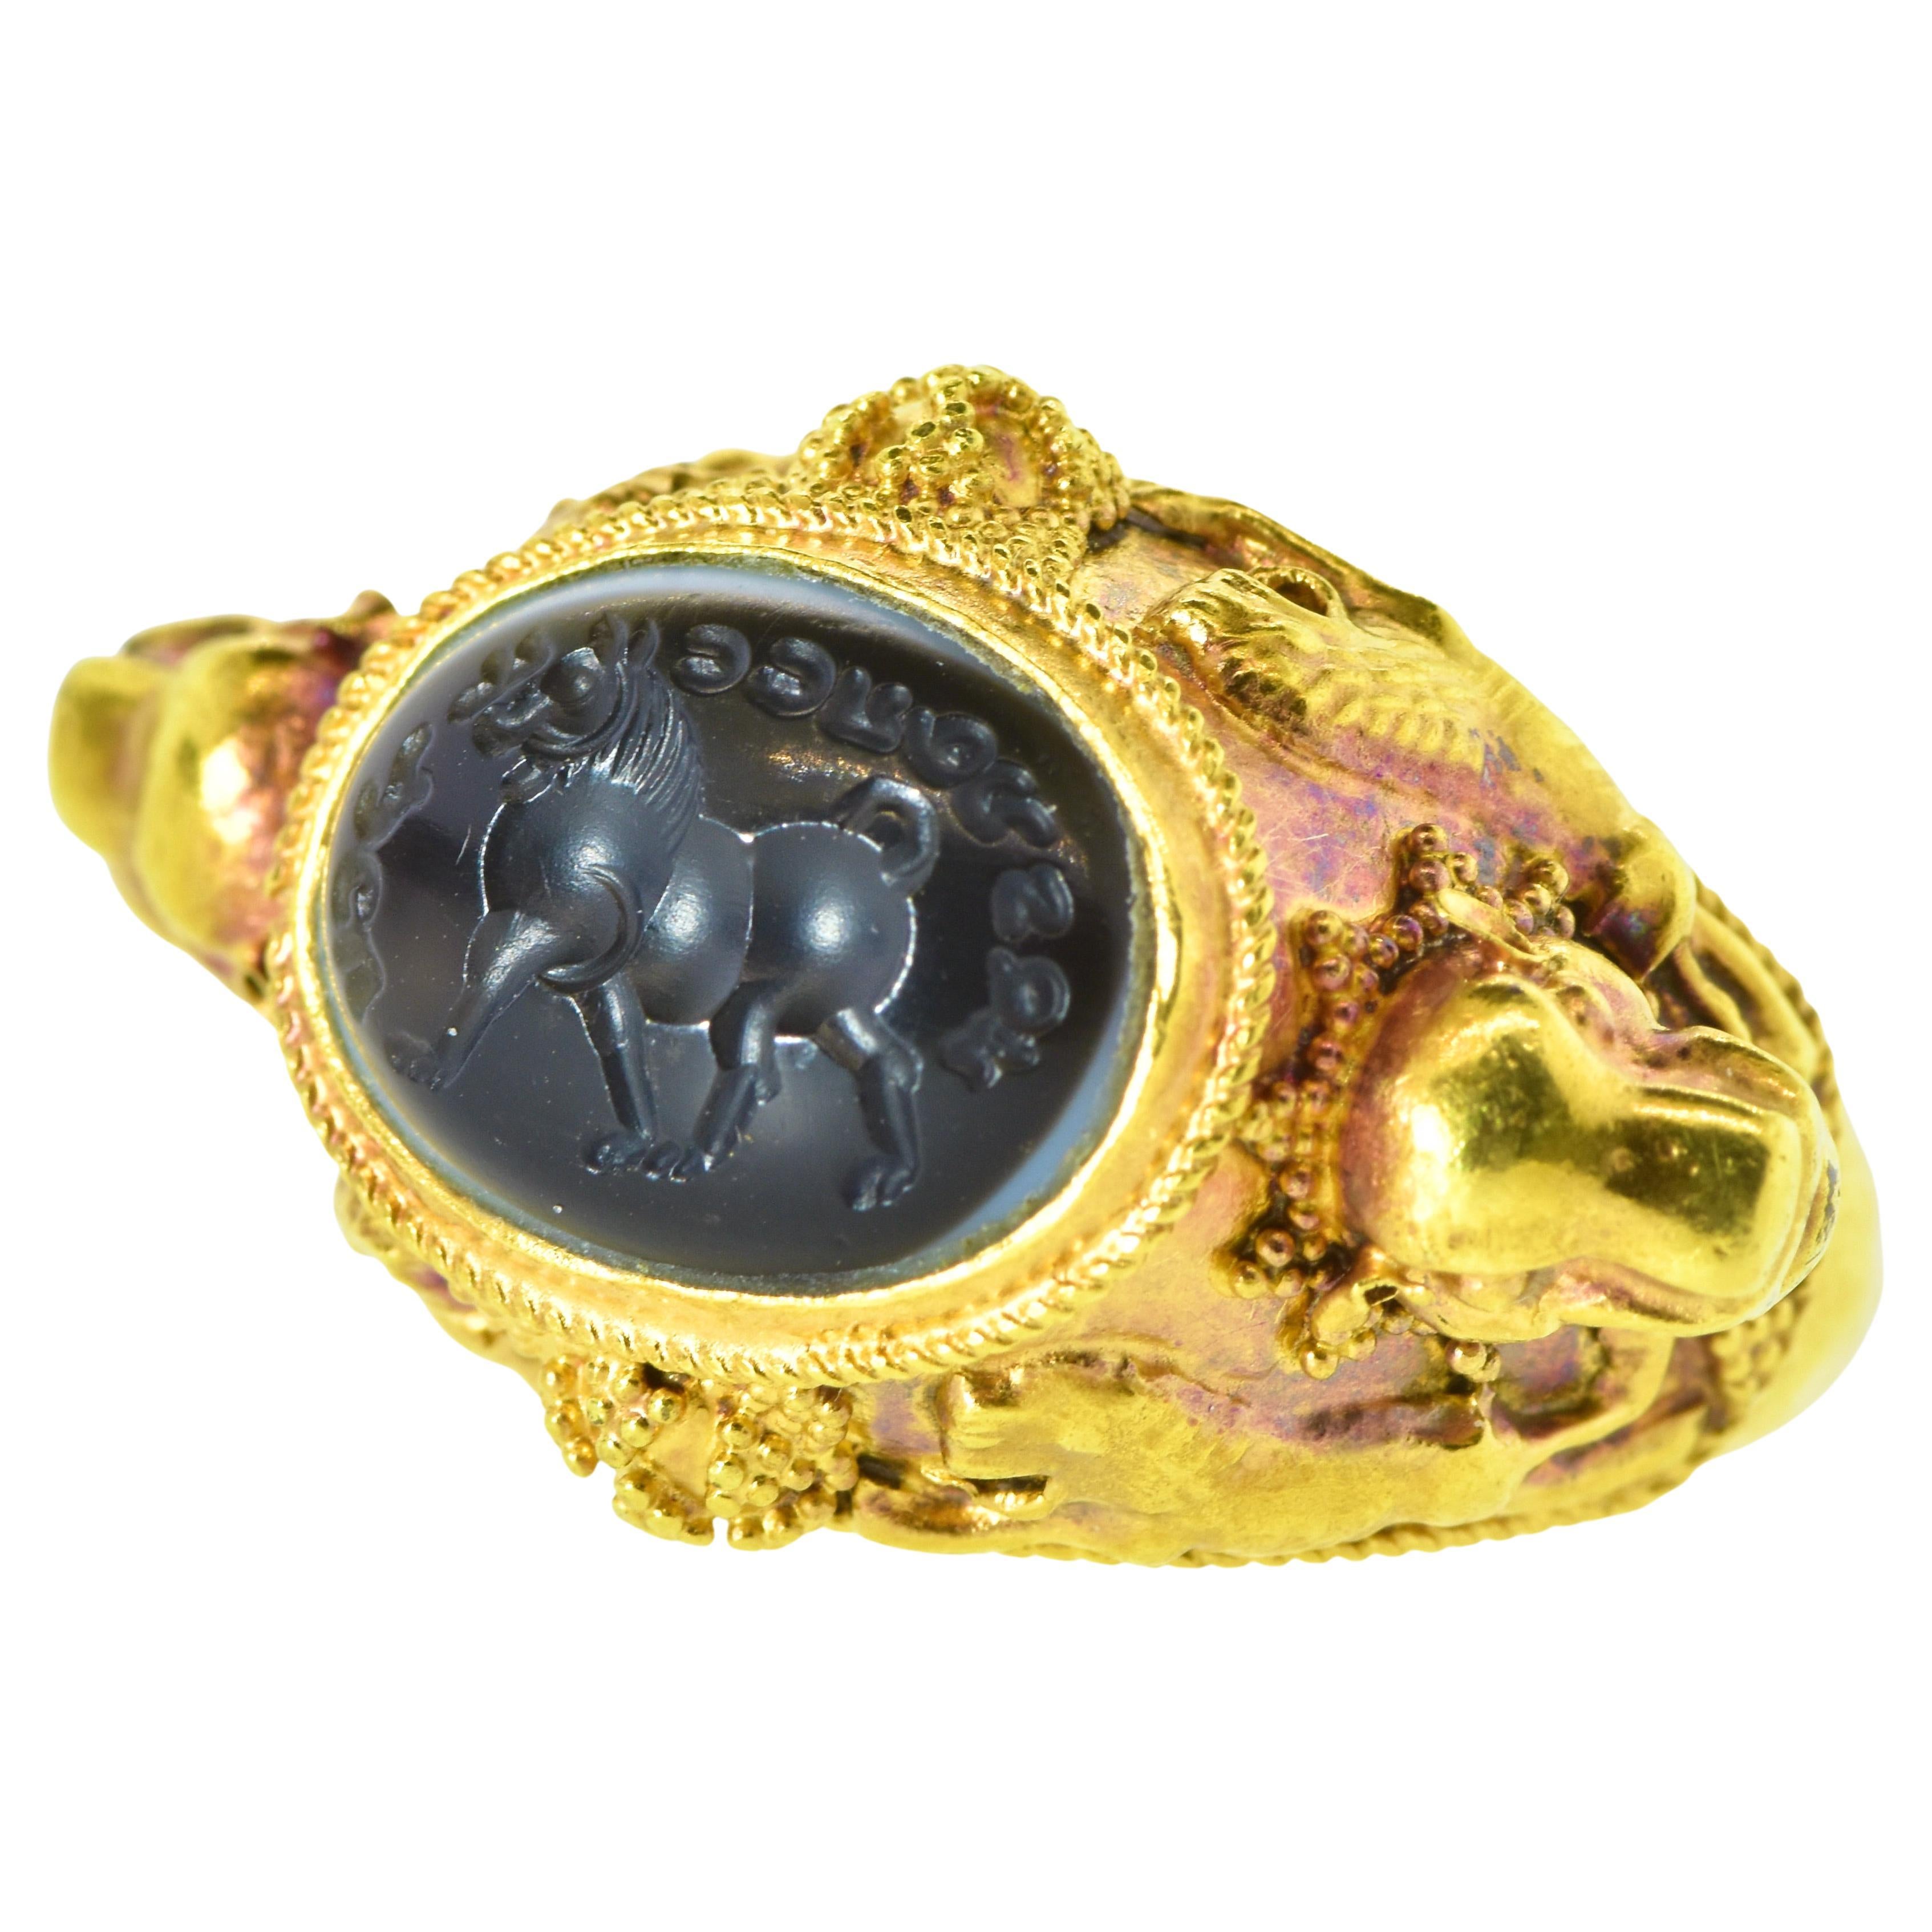 Antique Banded Agate Intaglio Within a Rare 22k Ring, C. 1800 4